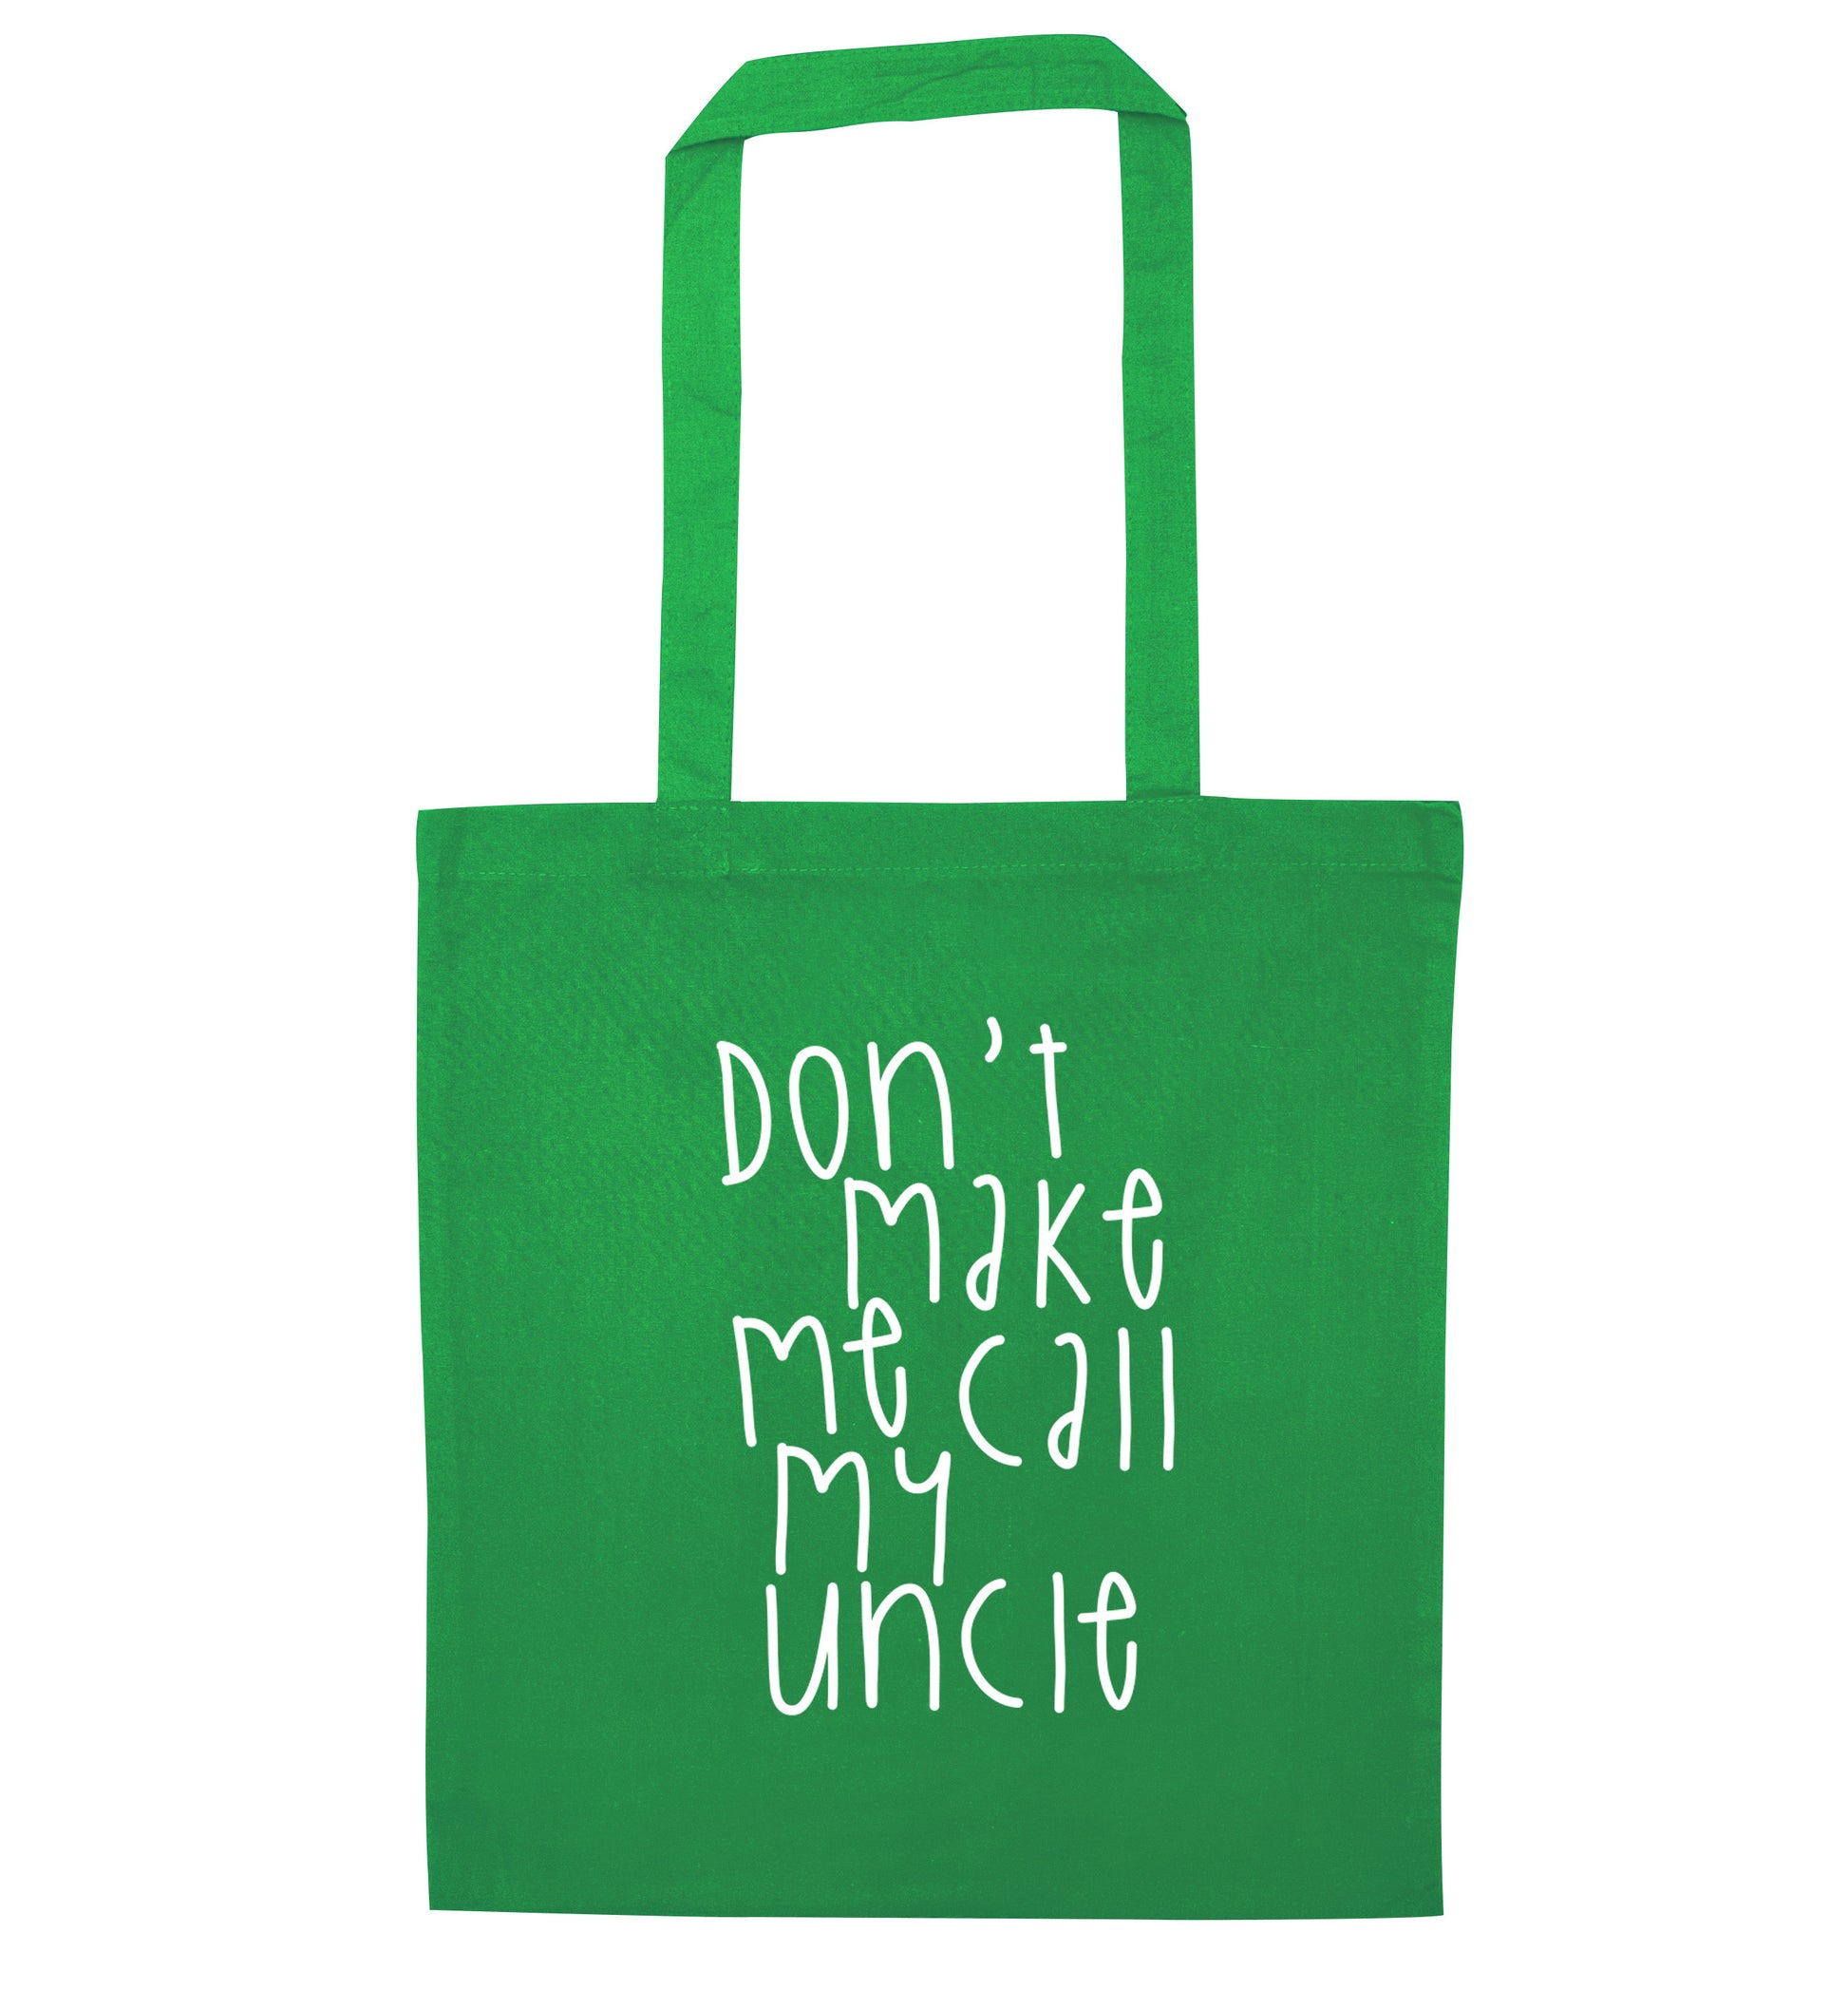 Don't make me call my uncle green tote bag